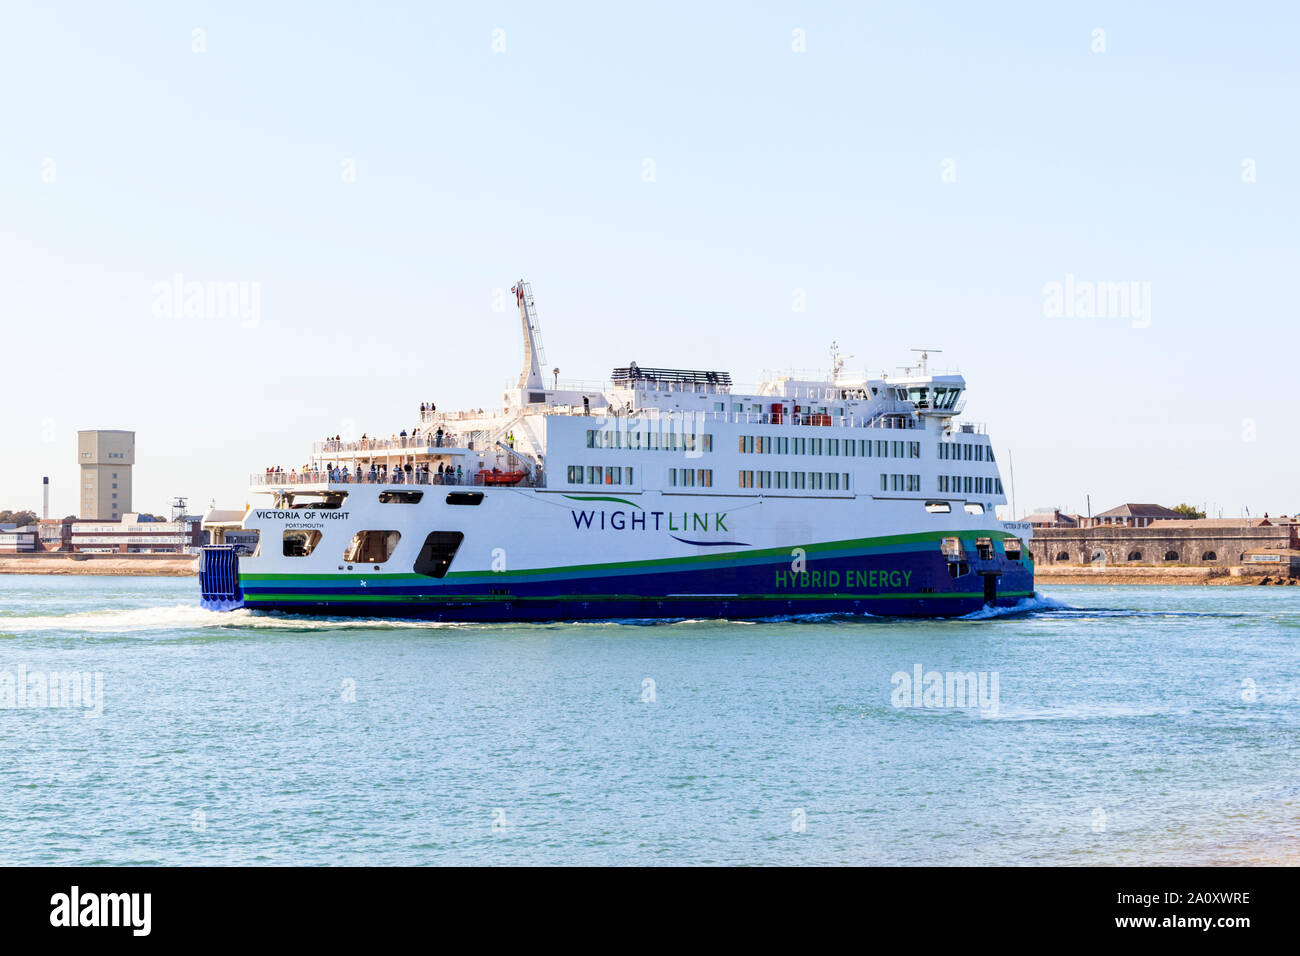 Wightlink 'Victoria of Wight' car ferry sailing into Portsmouth Harbour, UK Stock Photo